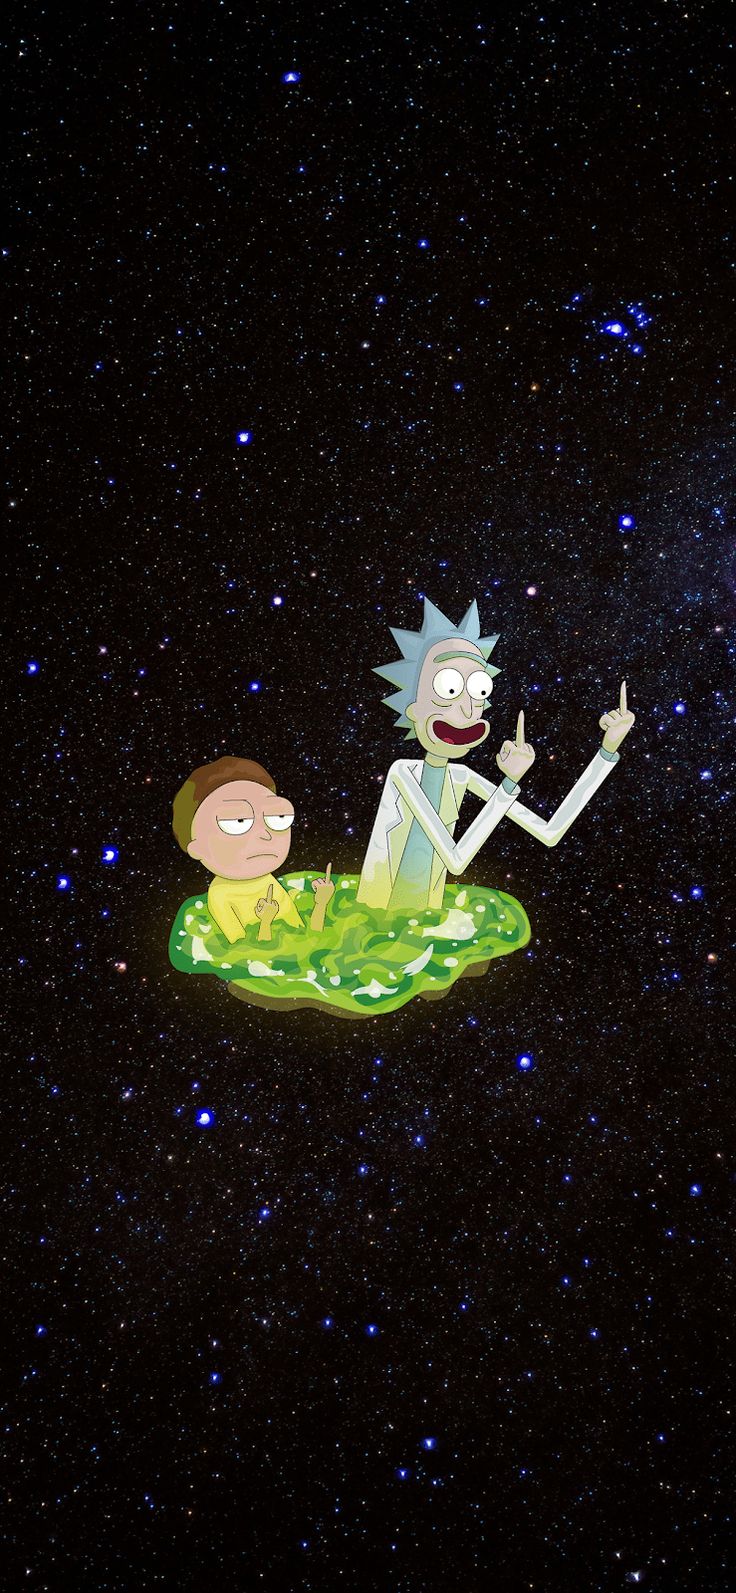 Rick And Morty Wallpaper Browse Rick And Morty Wallpaper with collections of Background, Desktop, iPhone, Rick And M. Rick and morty, Rick and morty poster, Morty